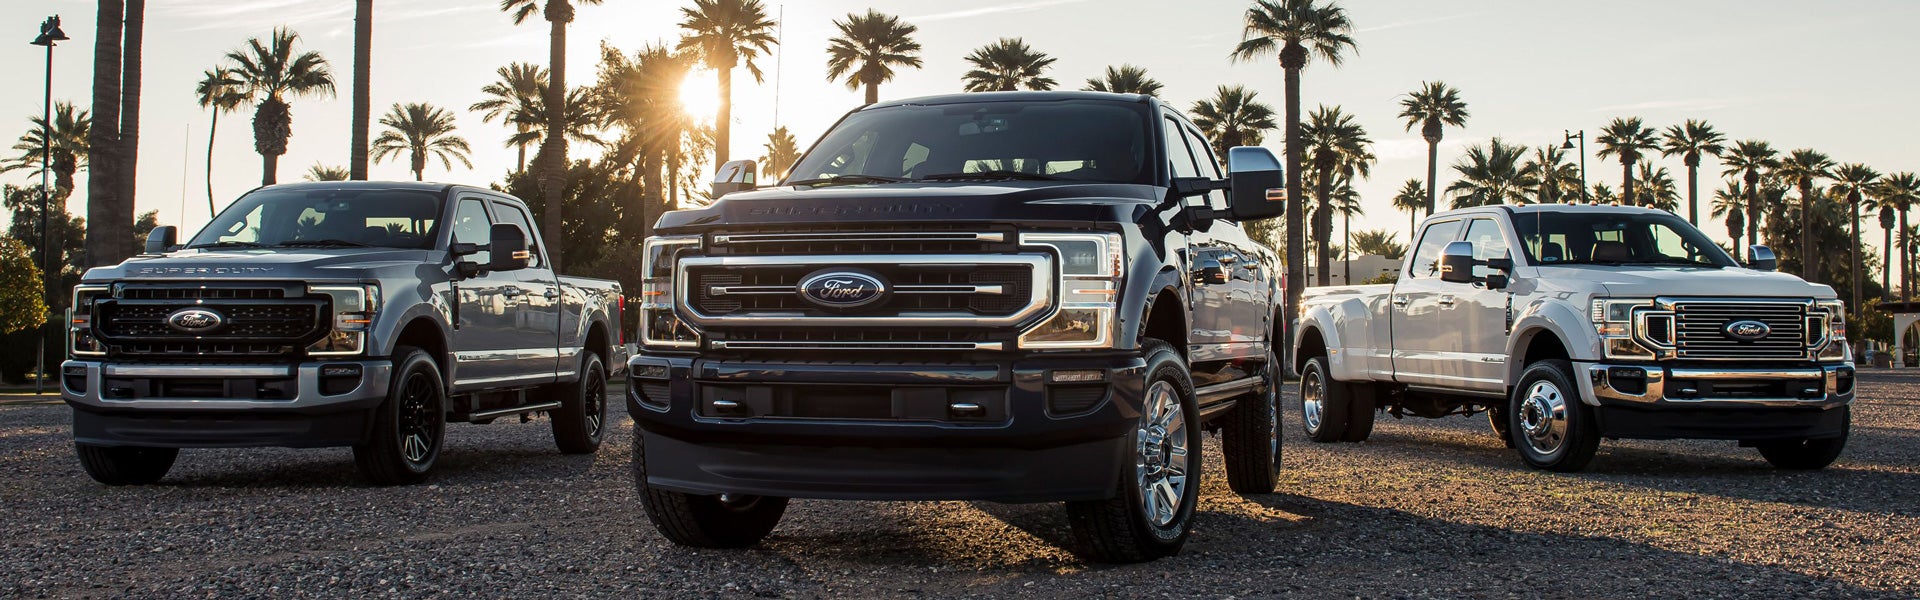 2021 Ford F-250 Near You